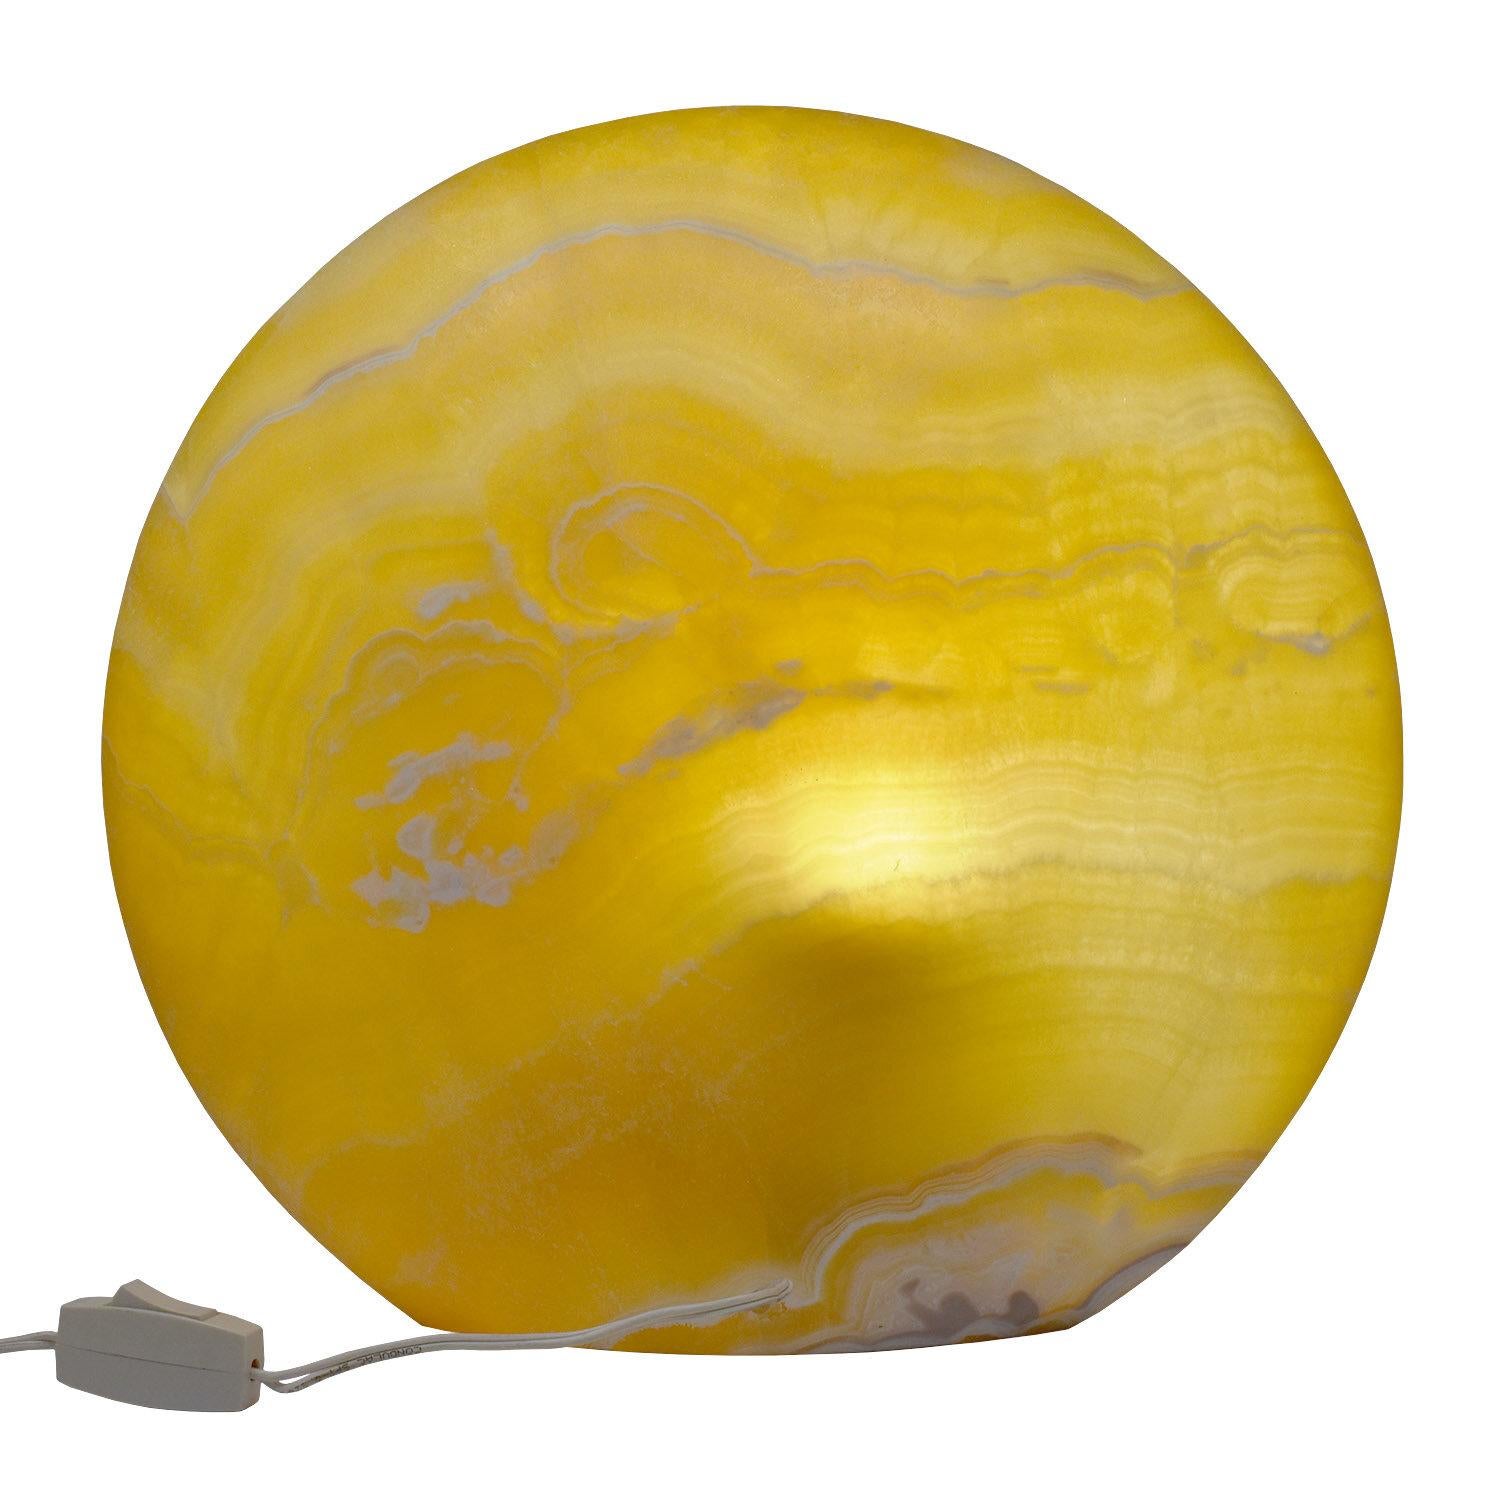 Contemporay natural yellow onyx table top lamp

Created from two thick slices of onyx, hollowed out to construct concave circles, forming a hollow for the bulb. The two sides are expertly connected together, with smooth, almost invisible seams,